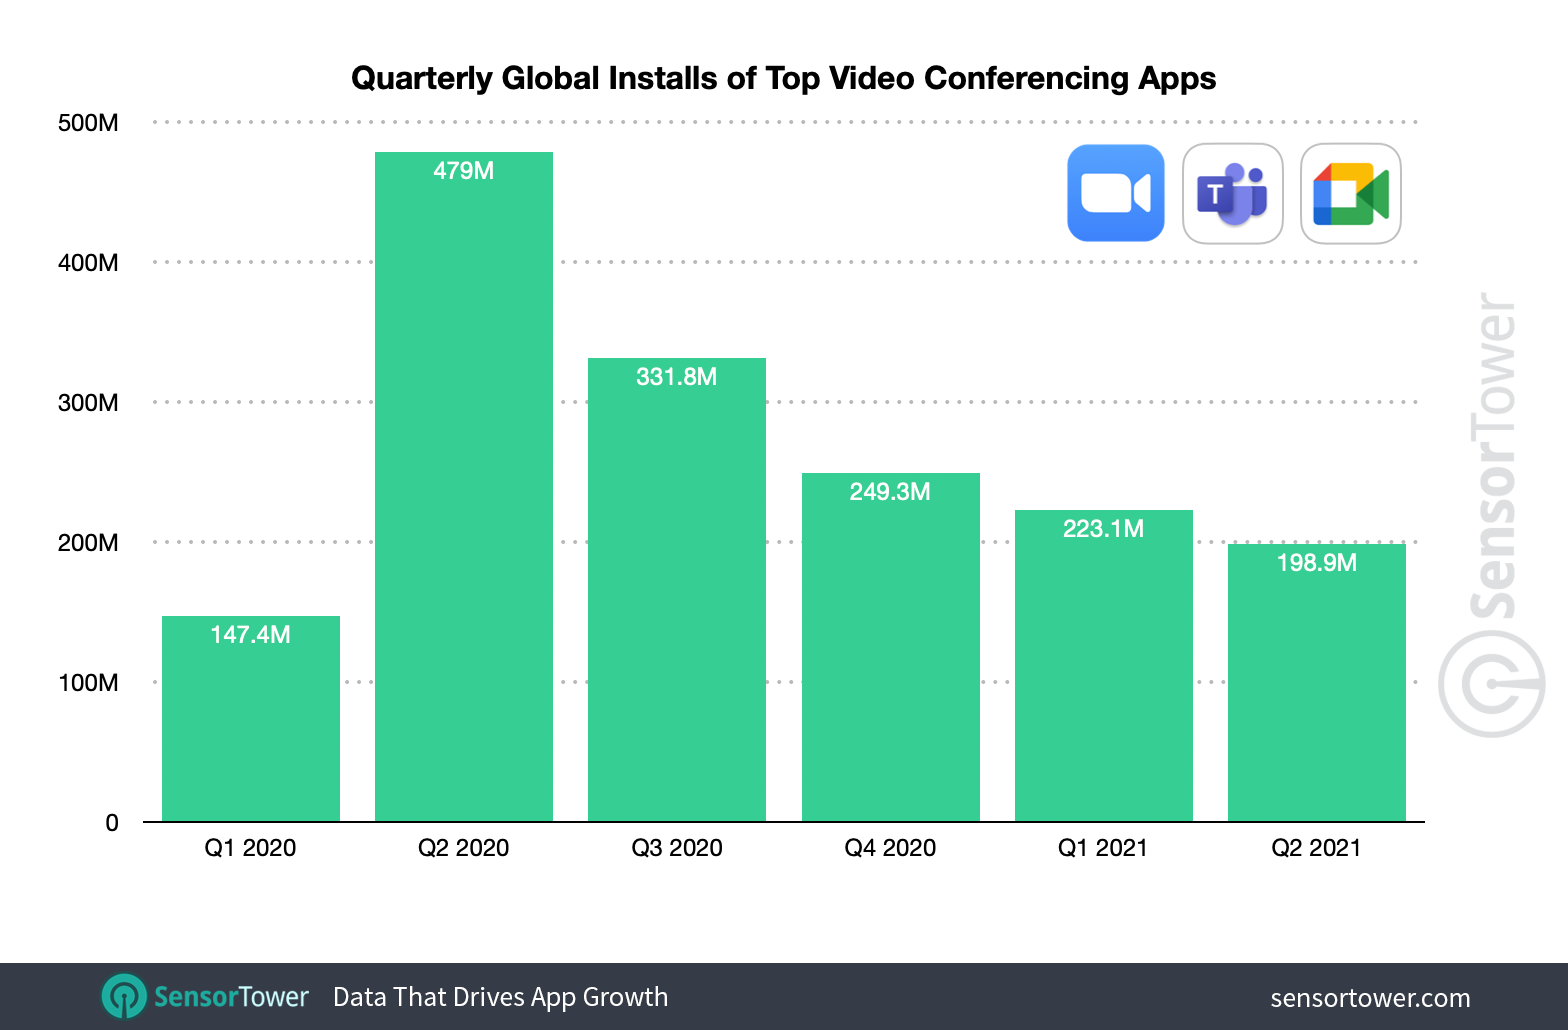 Zoom, Microsoft Teams, and Google Meet see fairly consistent installs each quarter